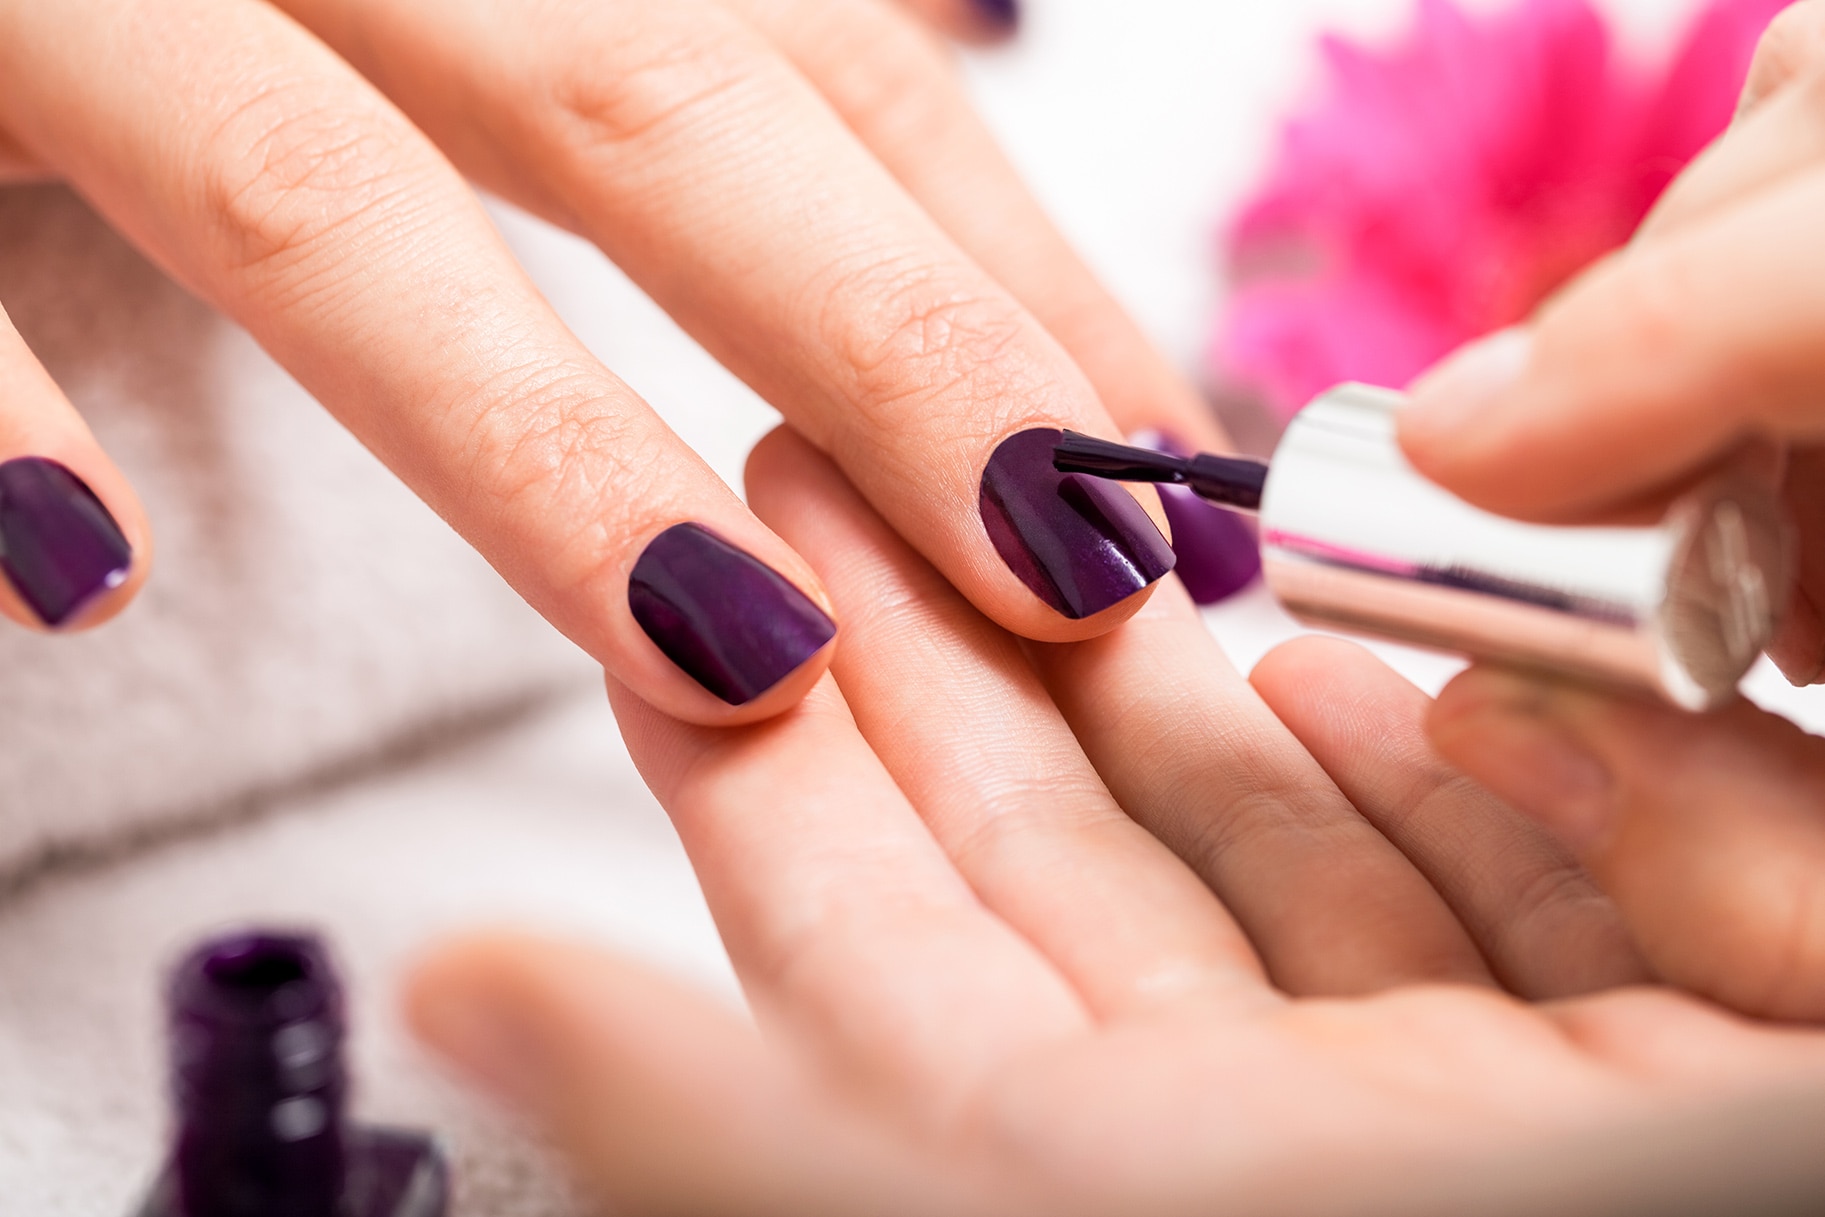 3. Unique Gel Nail Designs to Inspire Your Next Manicure - wide 7